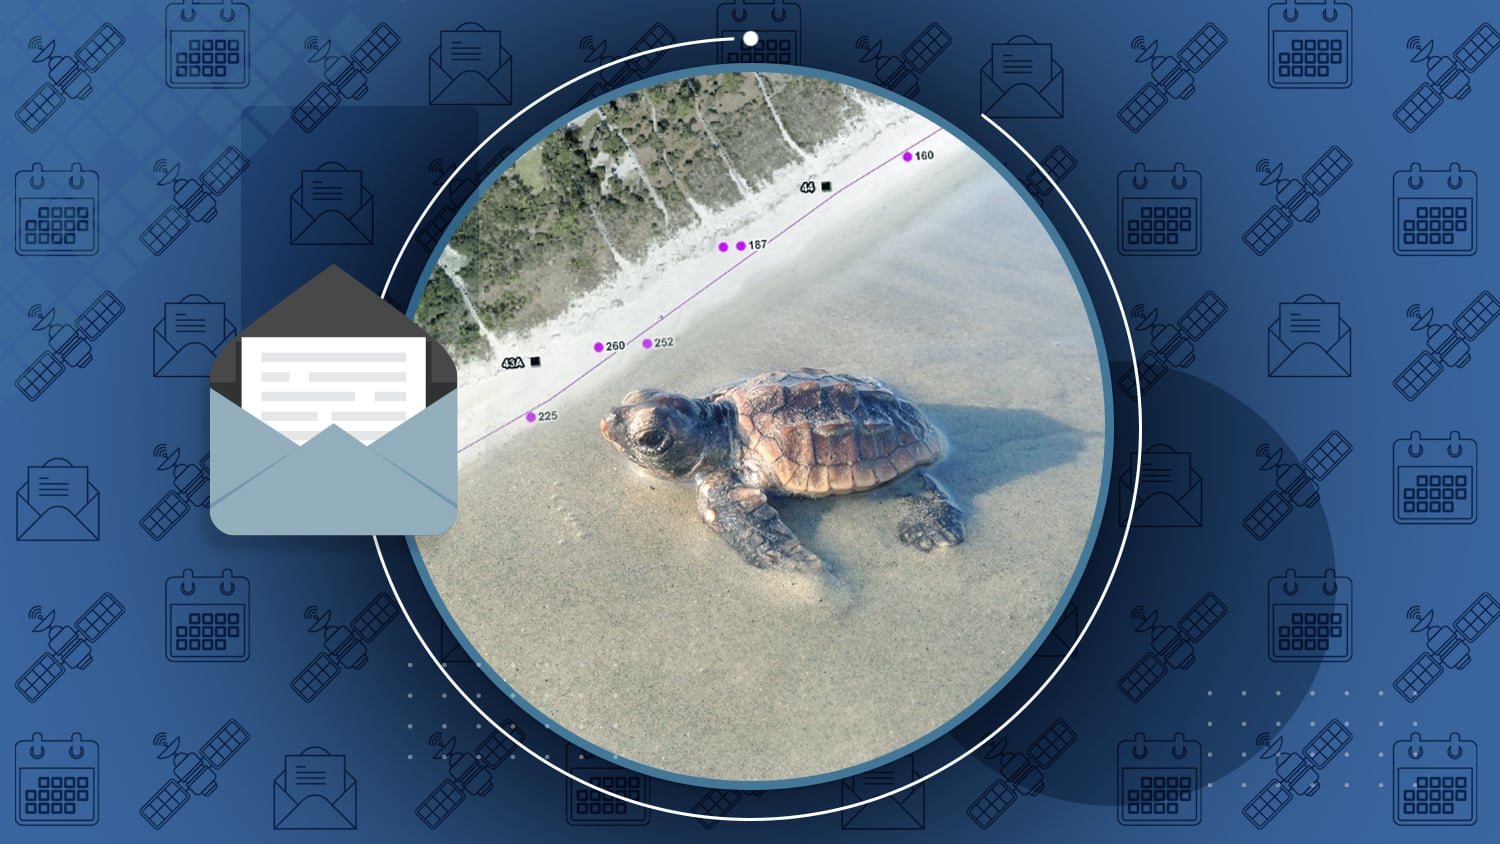 January 2022 Eos Arrow GNSS Newsletter - Using High-Accuracy GIS for Conservation to Save Endangered Sea Turtles